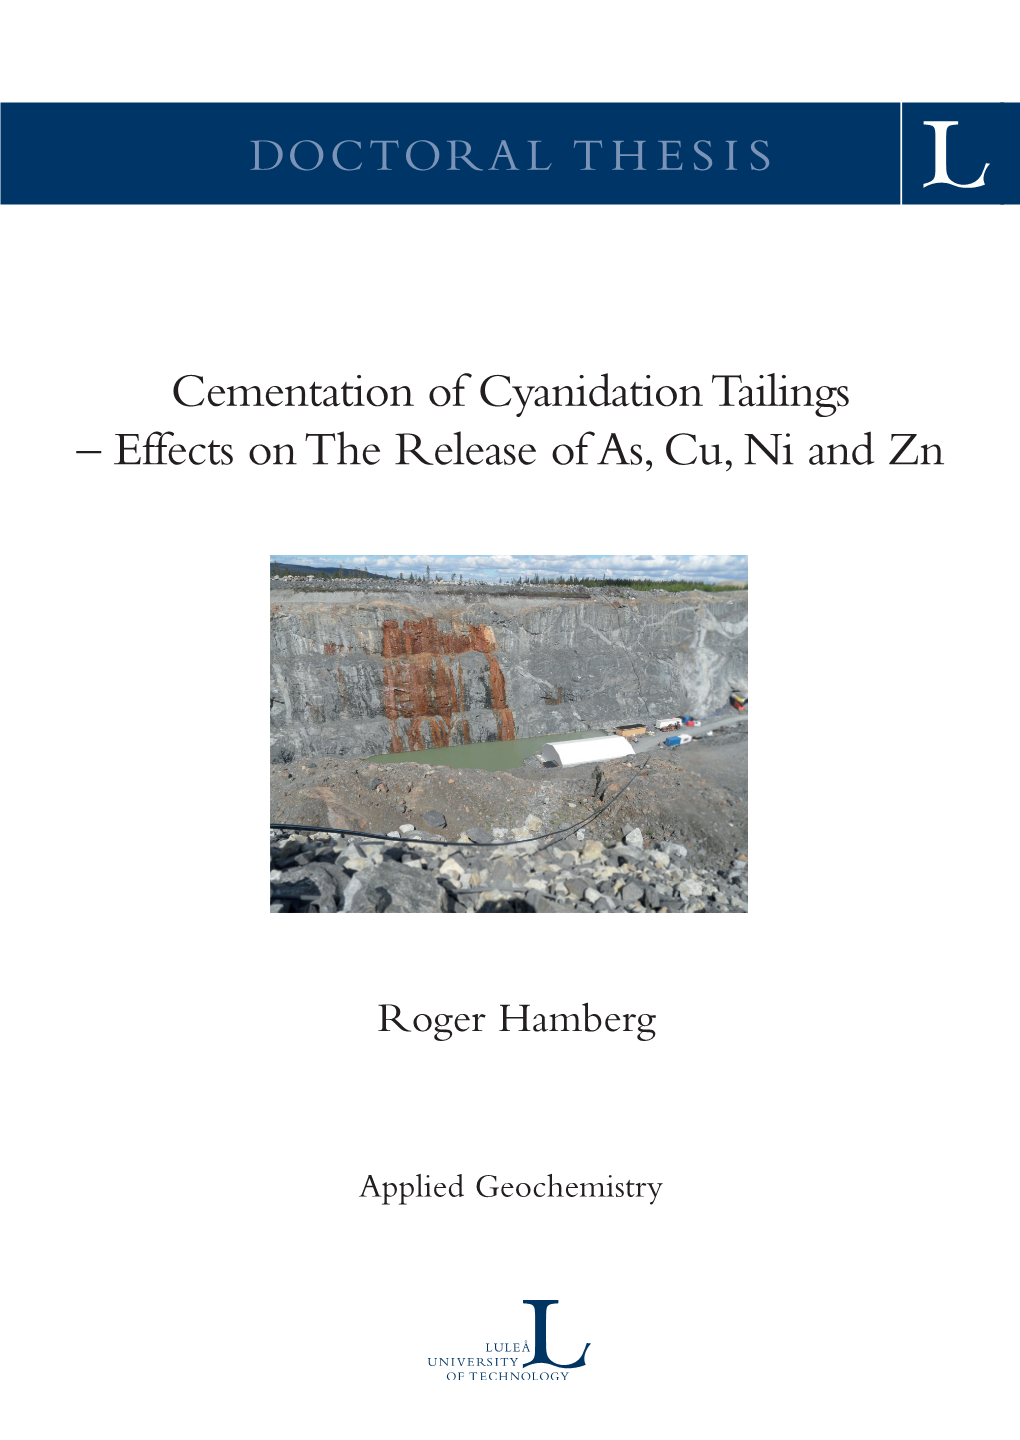 Cementation of Cyanidation Tailings – Effects on the Release of As, Cu, Ni and Zn